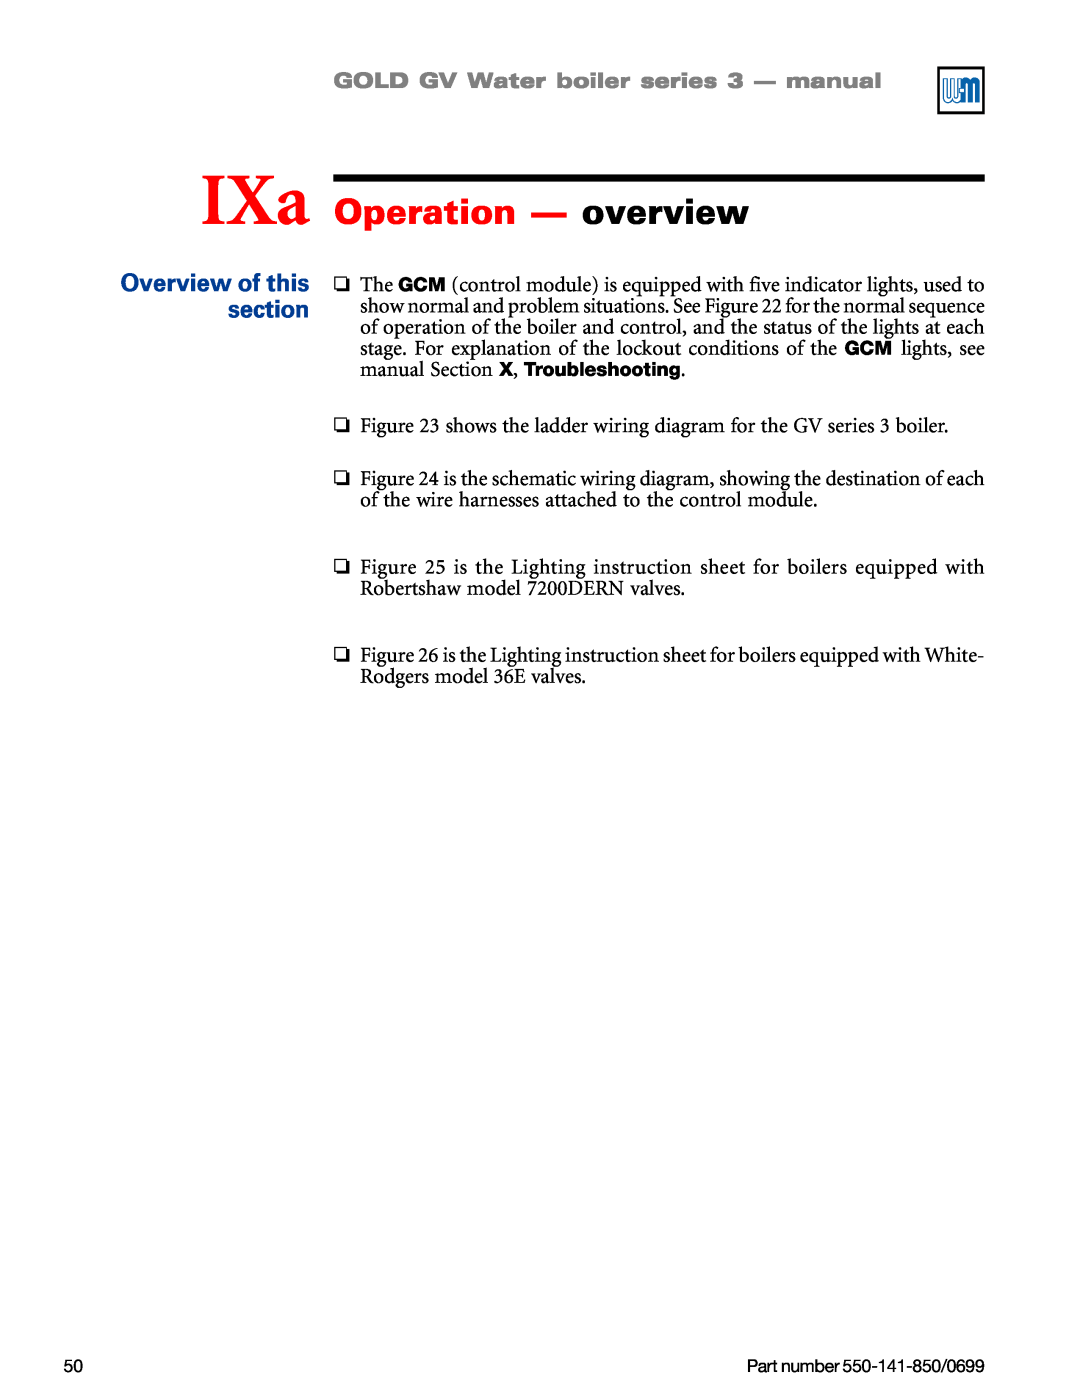 Weil-McLain GOLD DV WATER BOILER manual IXa Operation — overview, Overview of this section, Part number 550-141-850/0699 